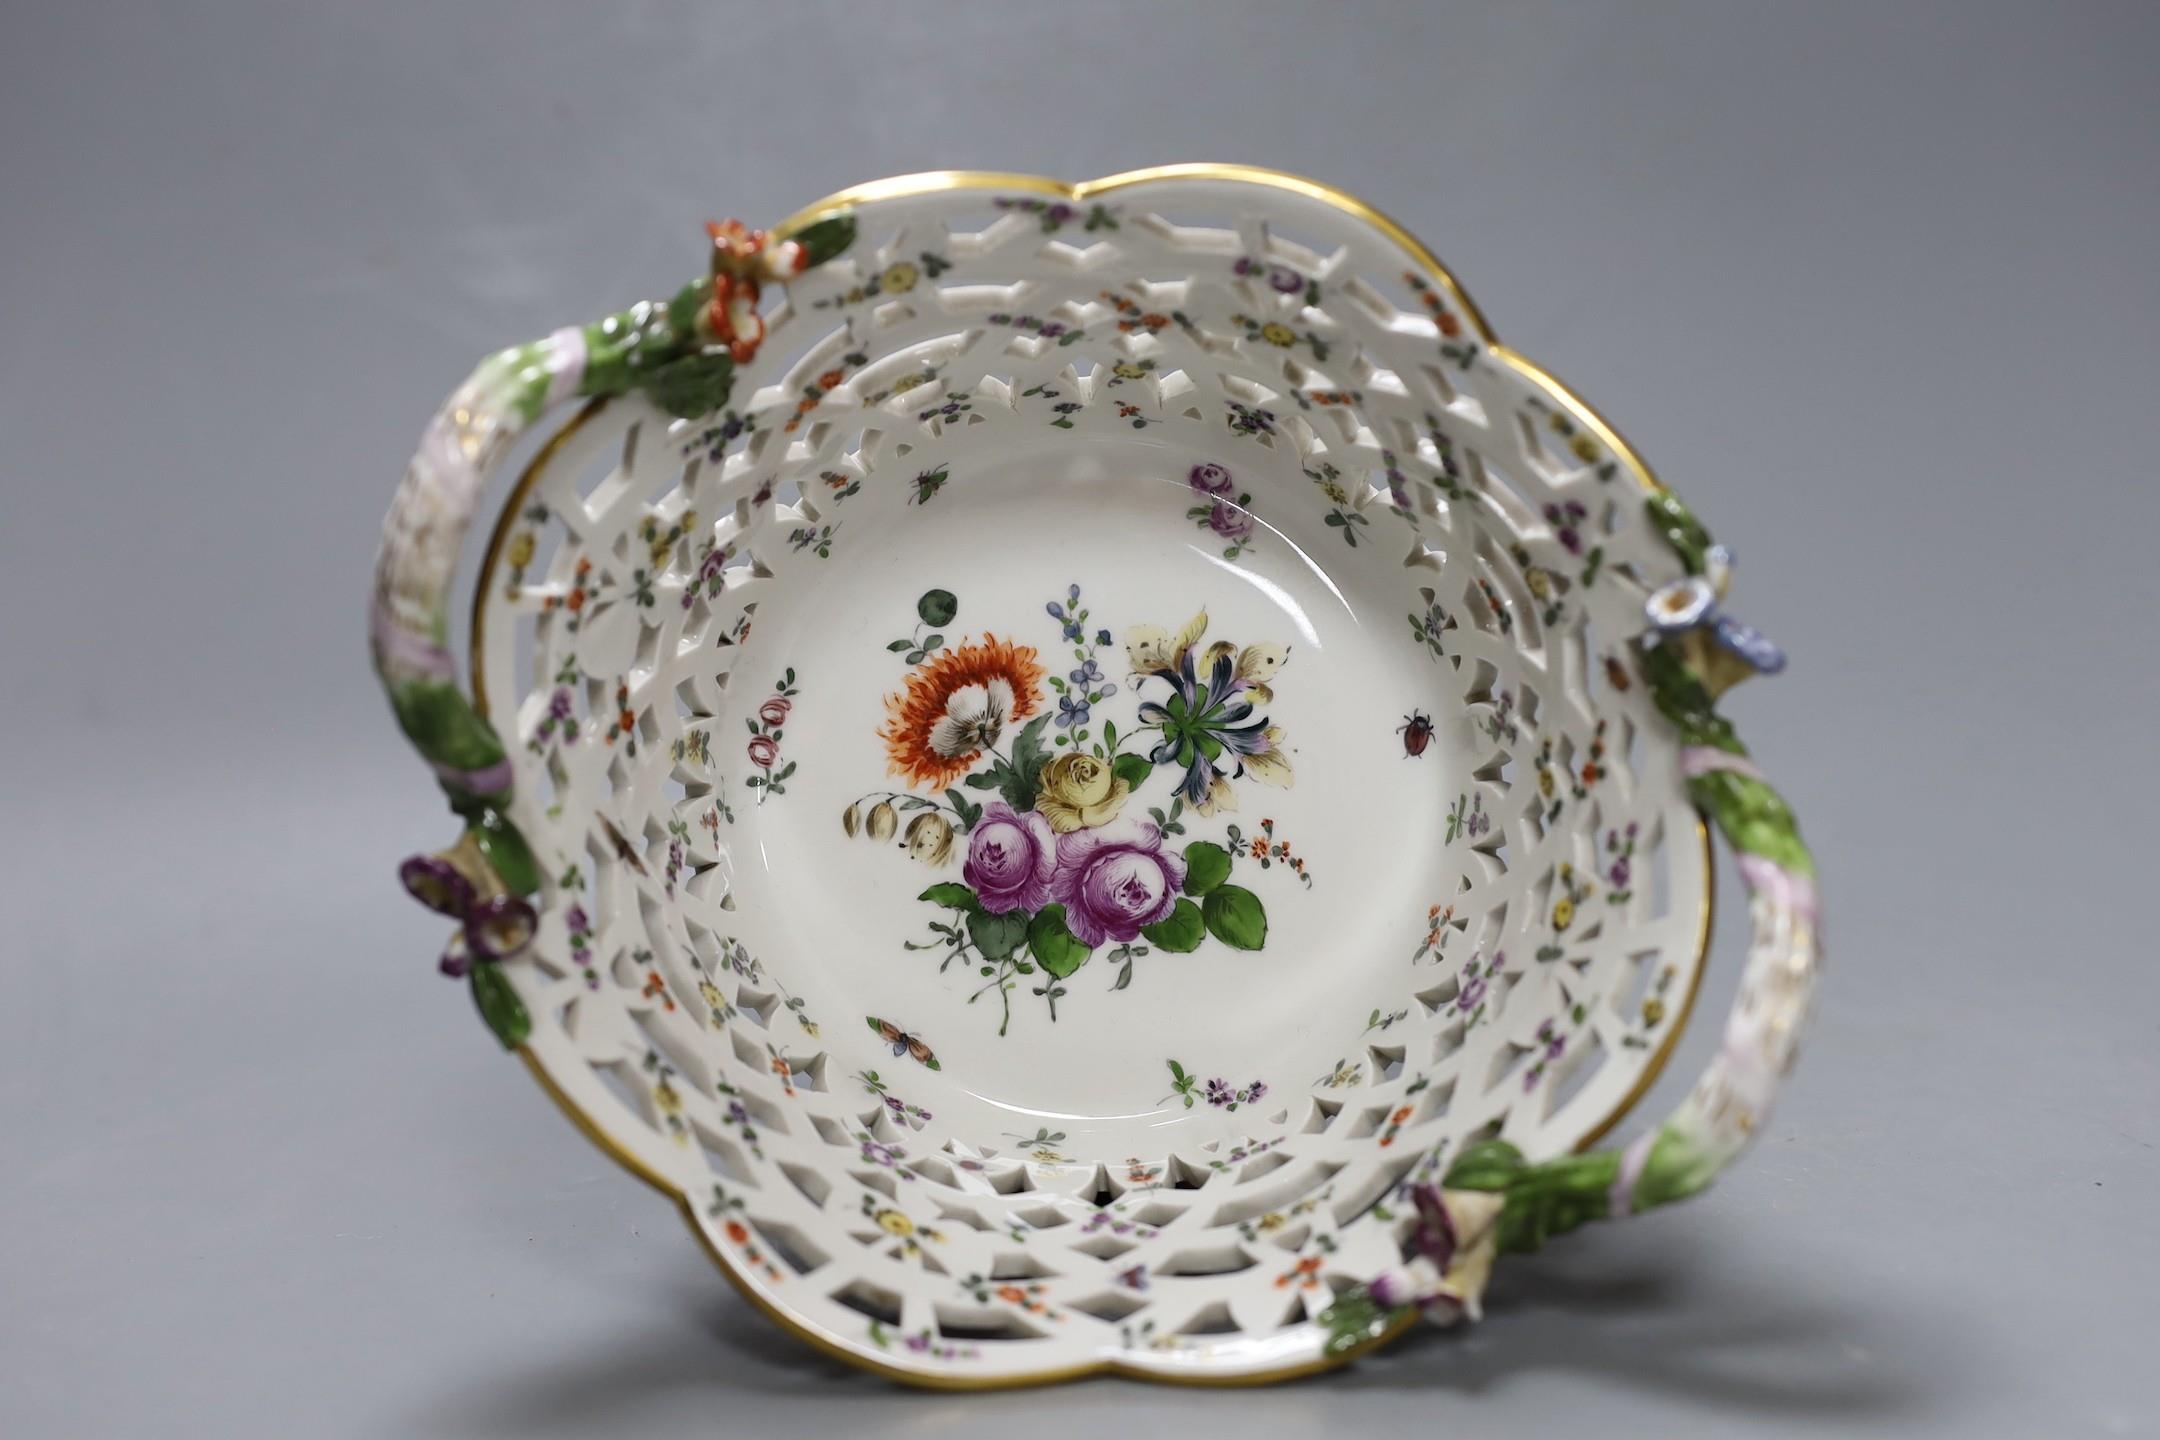 A two handled German silver mounted circular floral Berlin porcelain basket. 10cm high - Image 3 of 4